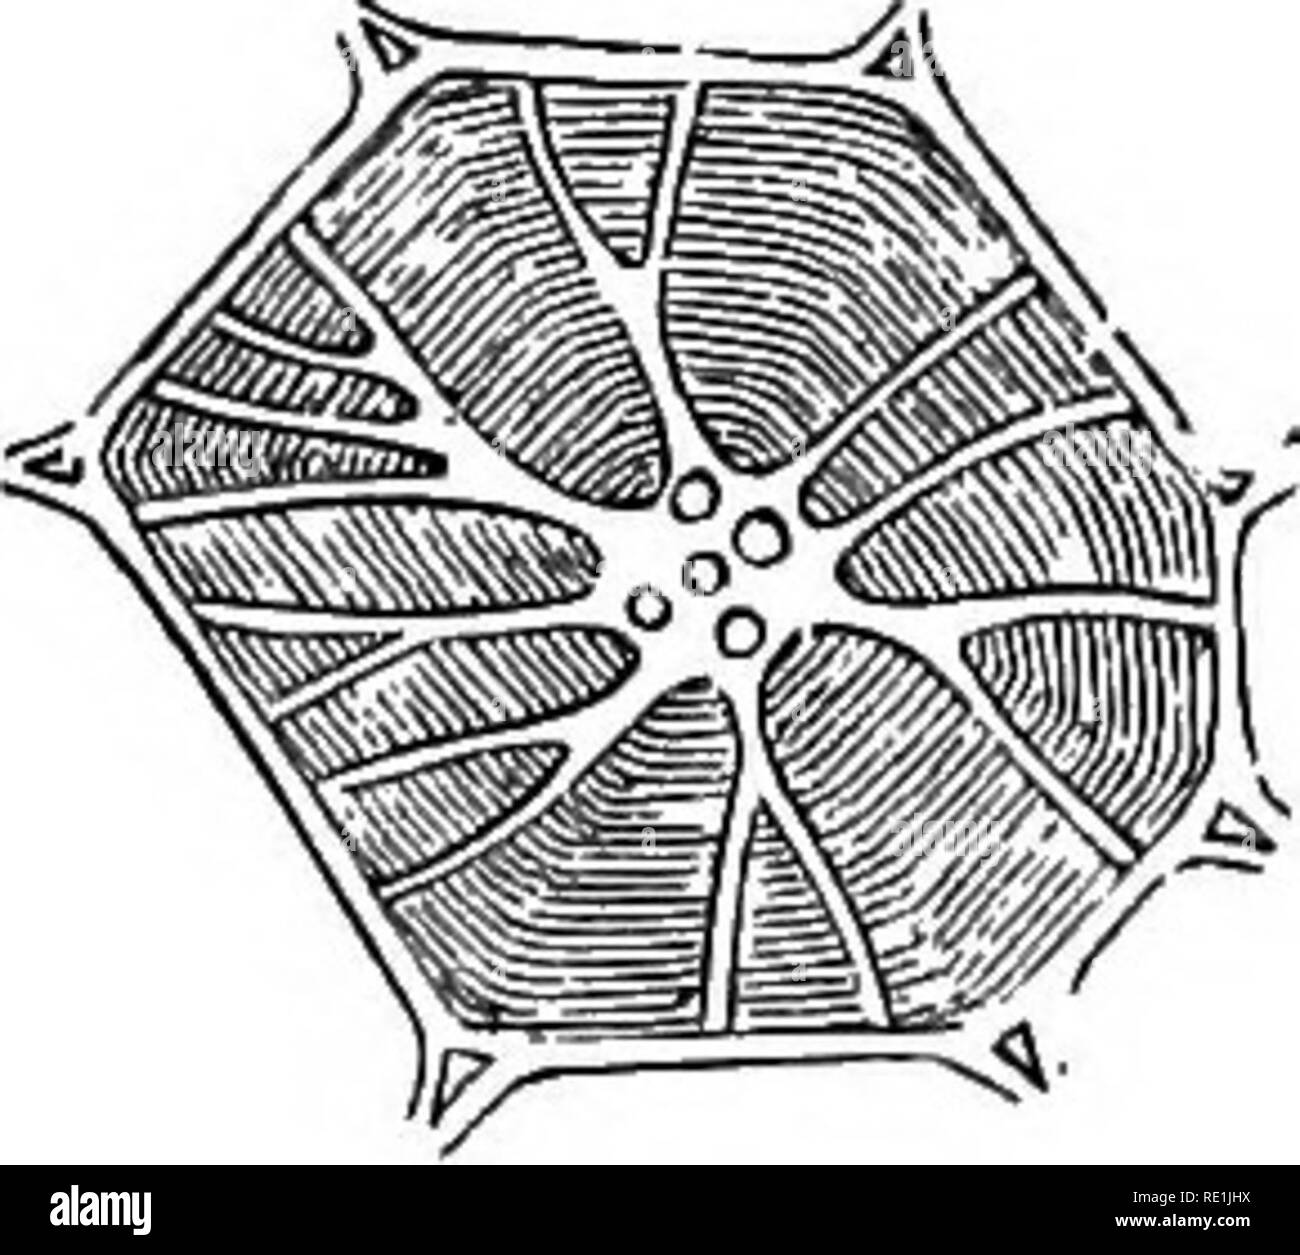 . A manual of botany. Botany. Fig. 626. Fig. 622. Elongated fusiform cells. Fig. 623. Pibrilliform cells (Iiypha'). Fig. 624. Transverse section of a thick-walled cell of the pith of Hoya carnosa. Prom TouMolil. Fig. 626. Thick-walled cells fromthefruit of a Palm, a, a. Cell-walls, h, b. Concentric layers of thickening, c. Canals extending from the central cavity to the inside of the wall of the cell. d. Cavity of the cell, e, e. External dotted appearance. Prom Unger. Fin. 826. Striated fibres from bast of Lime tree. Of those cells, which are extended in length or verticall,^', we have such f Stock Photo